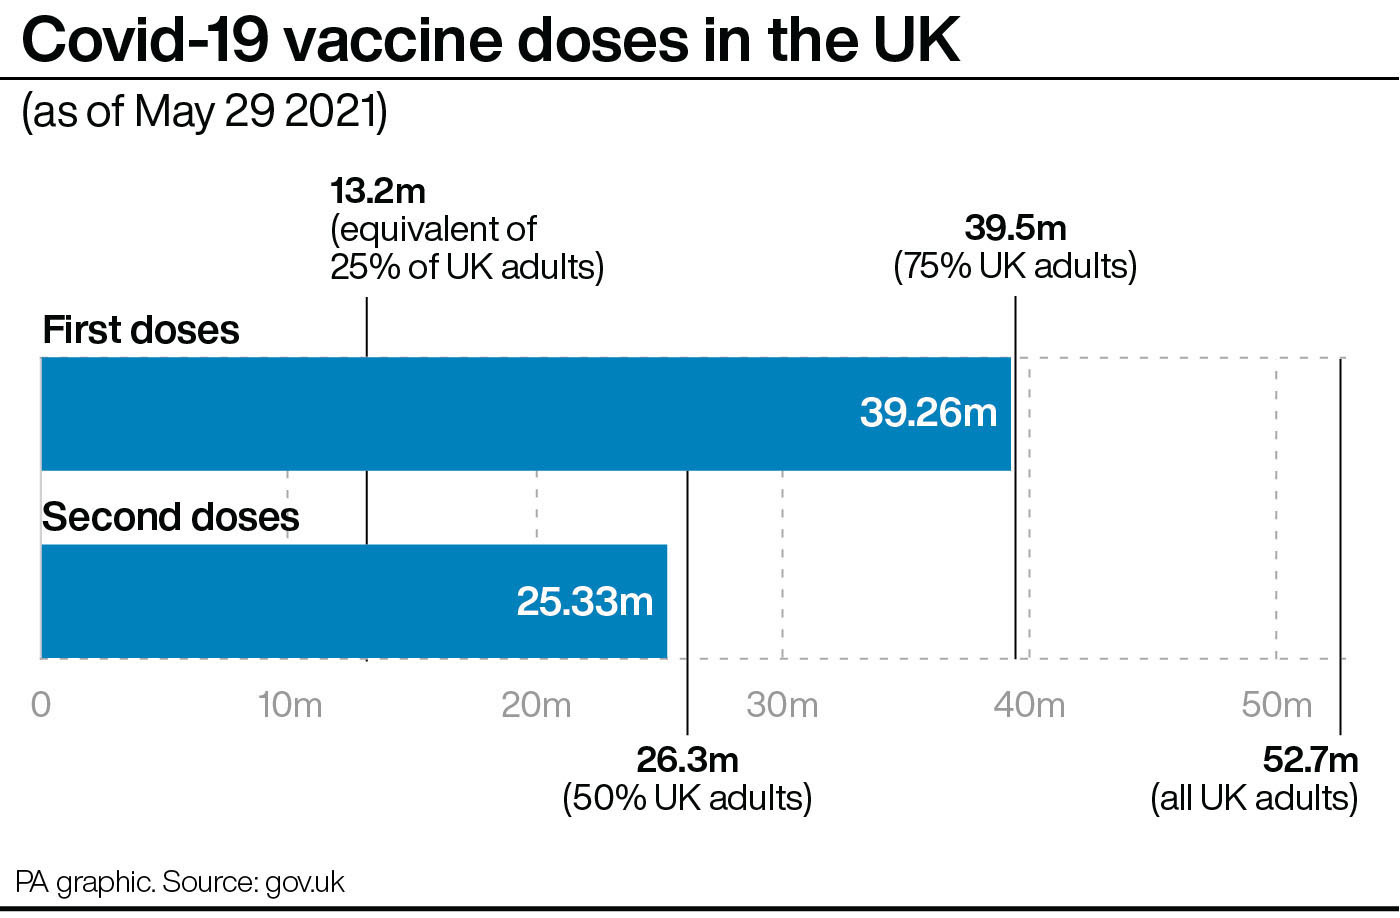 warns growth decelerate significantly mandates vaccine